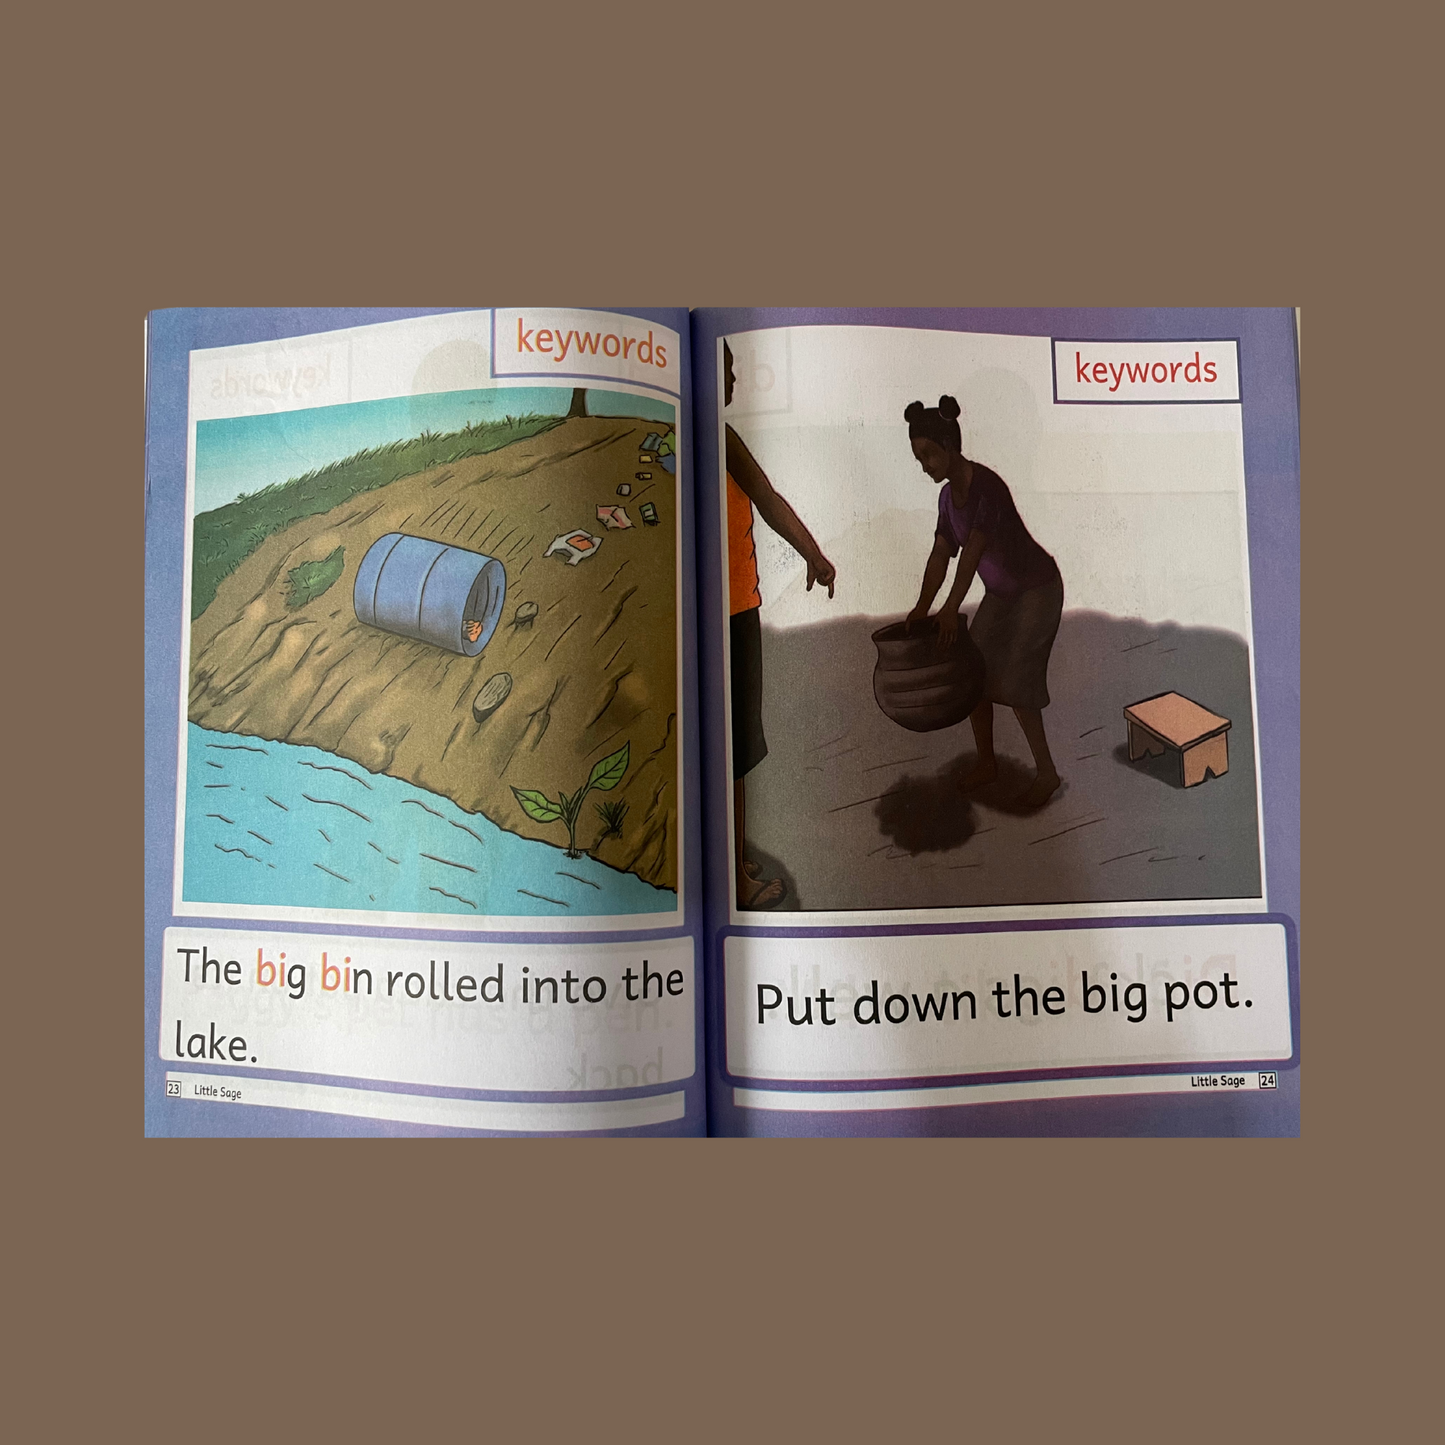 Beginning to Read (Reinforced Phonics Reader 2a): Tom has a lot of toys and other Readers